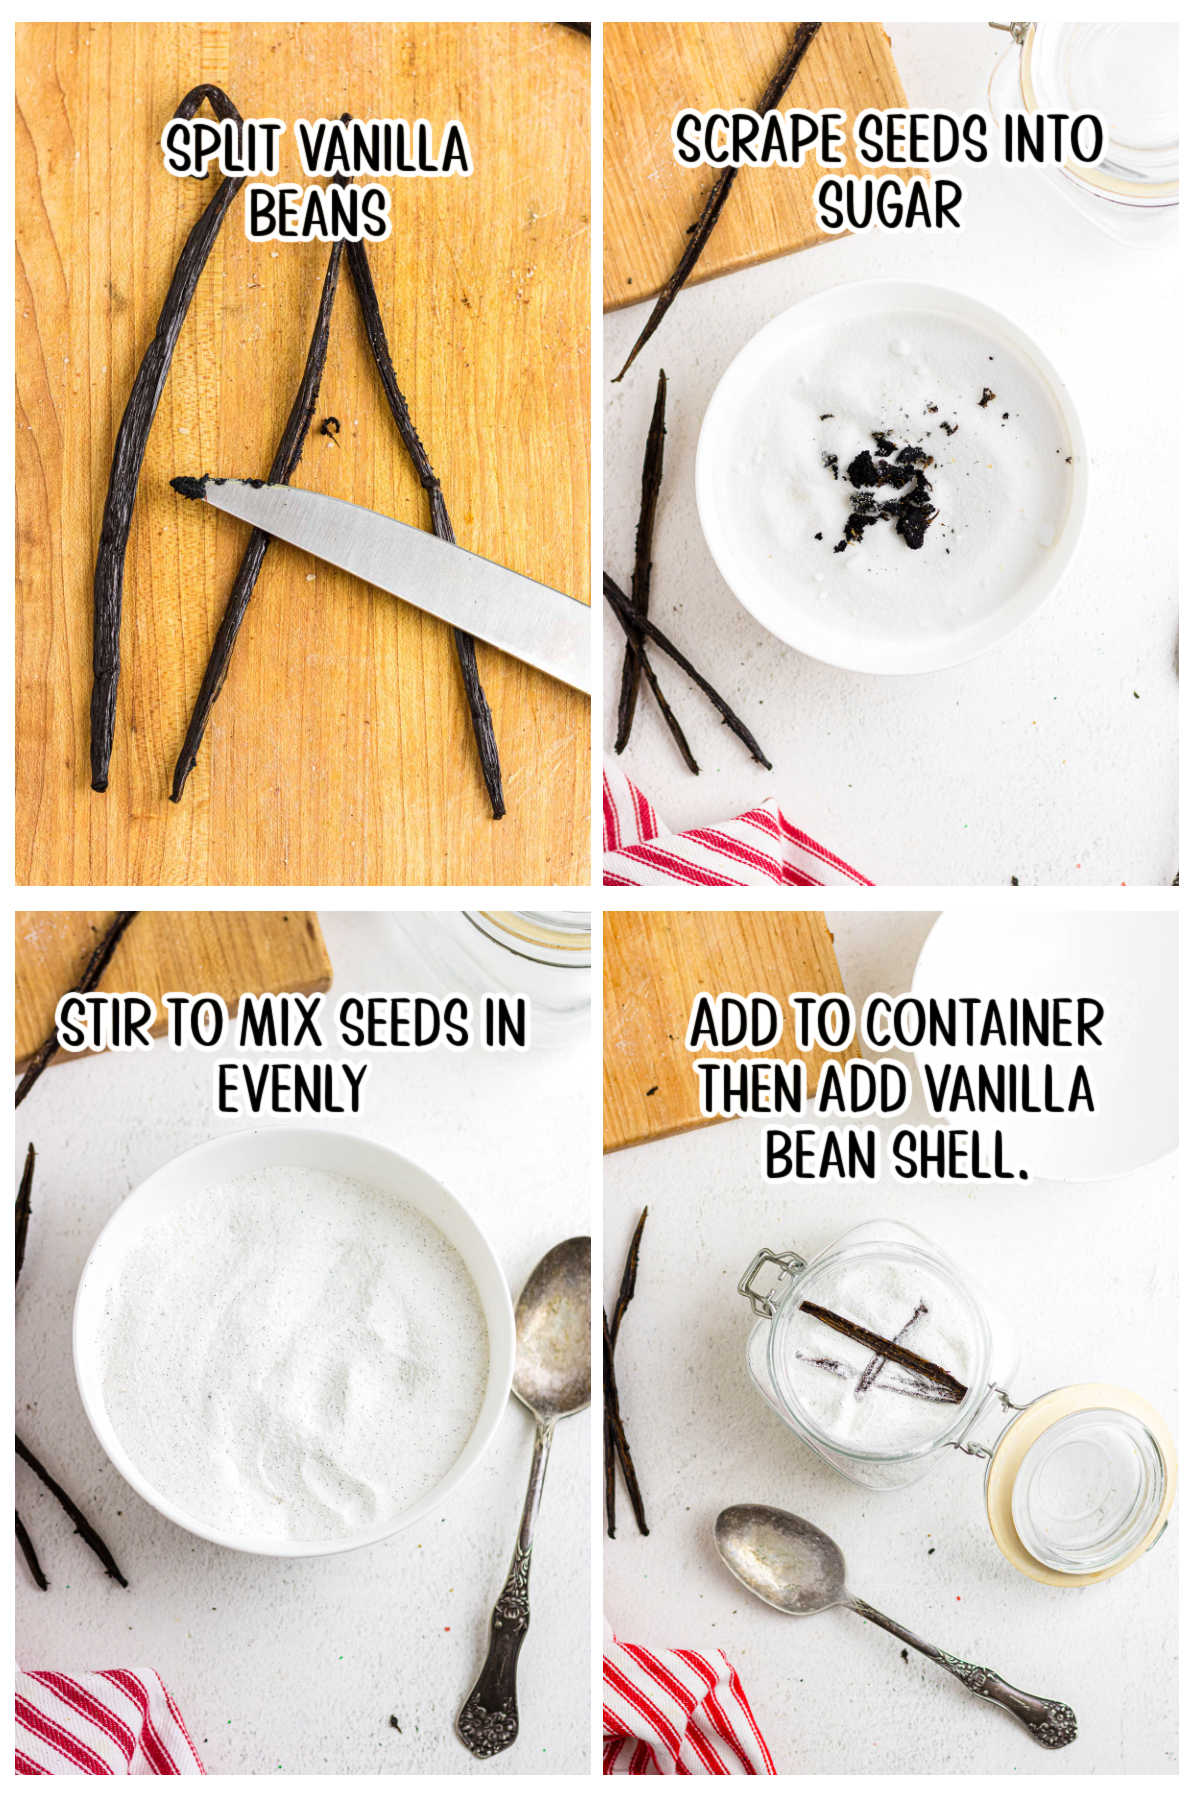 Four overhead images in a grid with text overlay. 1) A knife splitting vanilla beans in half. 2) The vanilla beans seeds in a bowl with white sugar. 3) The sugar and black seeds stirred together. 4) The sugar and vanilla bean pods in a lidded mason jar.